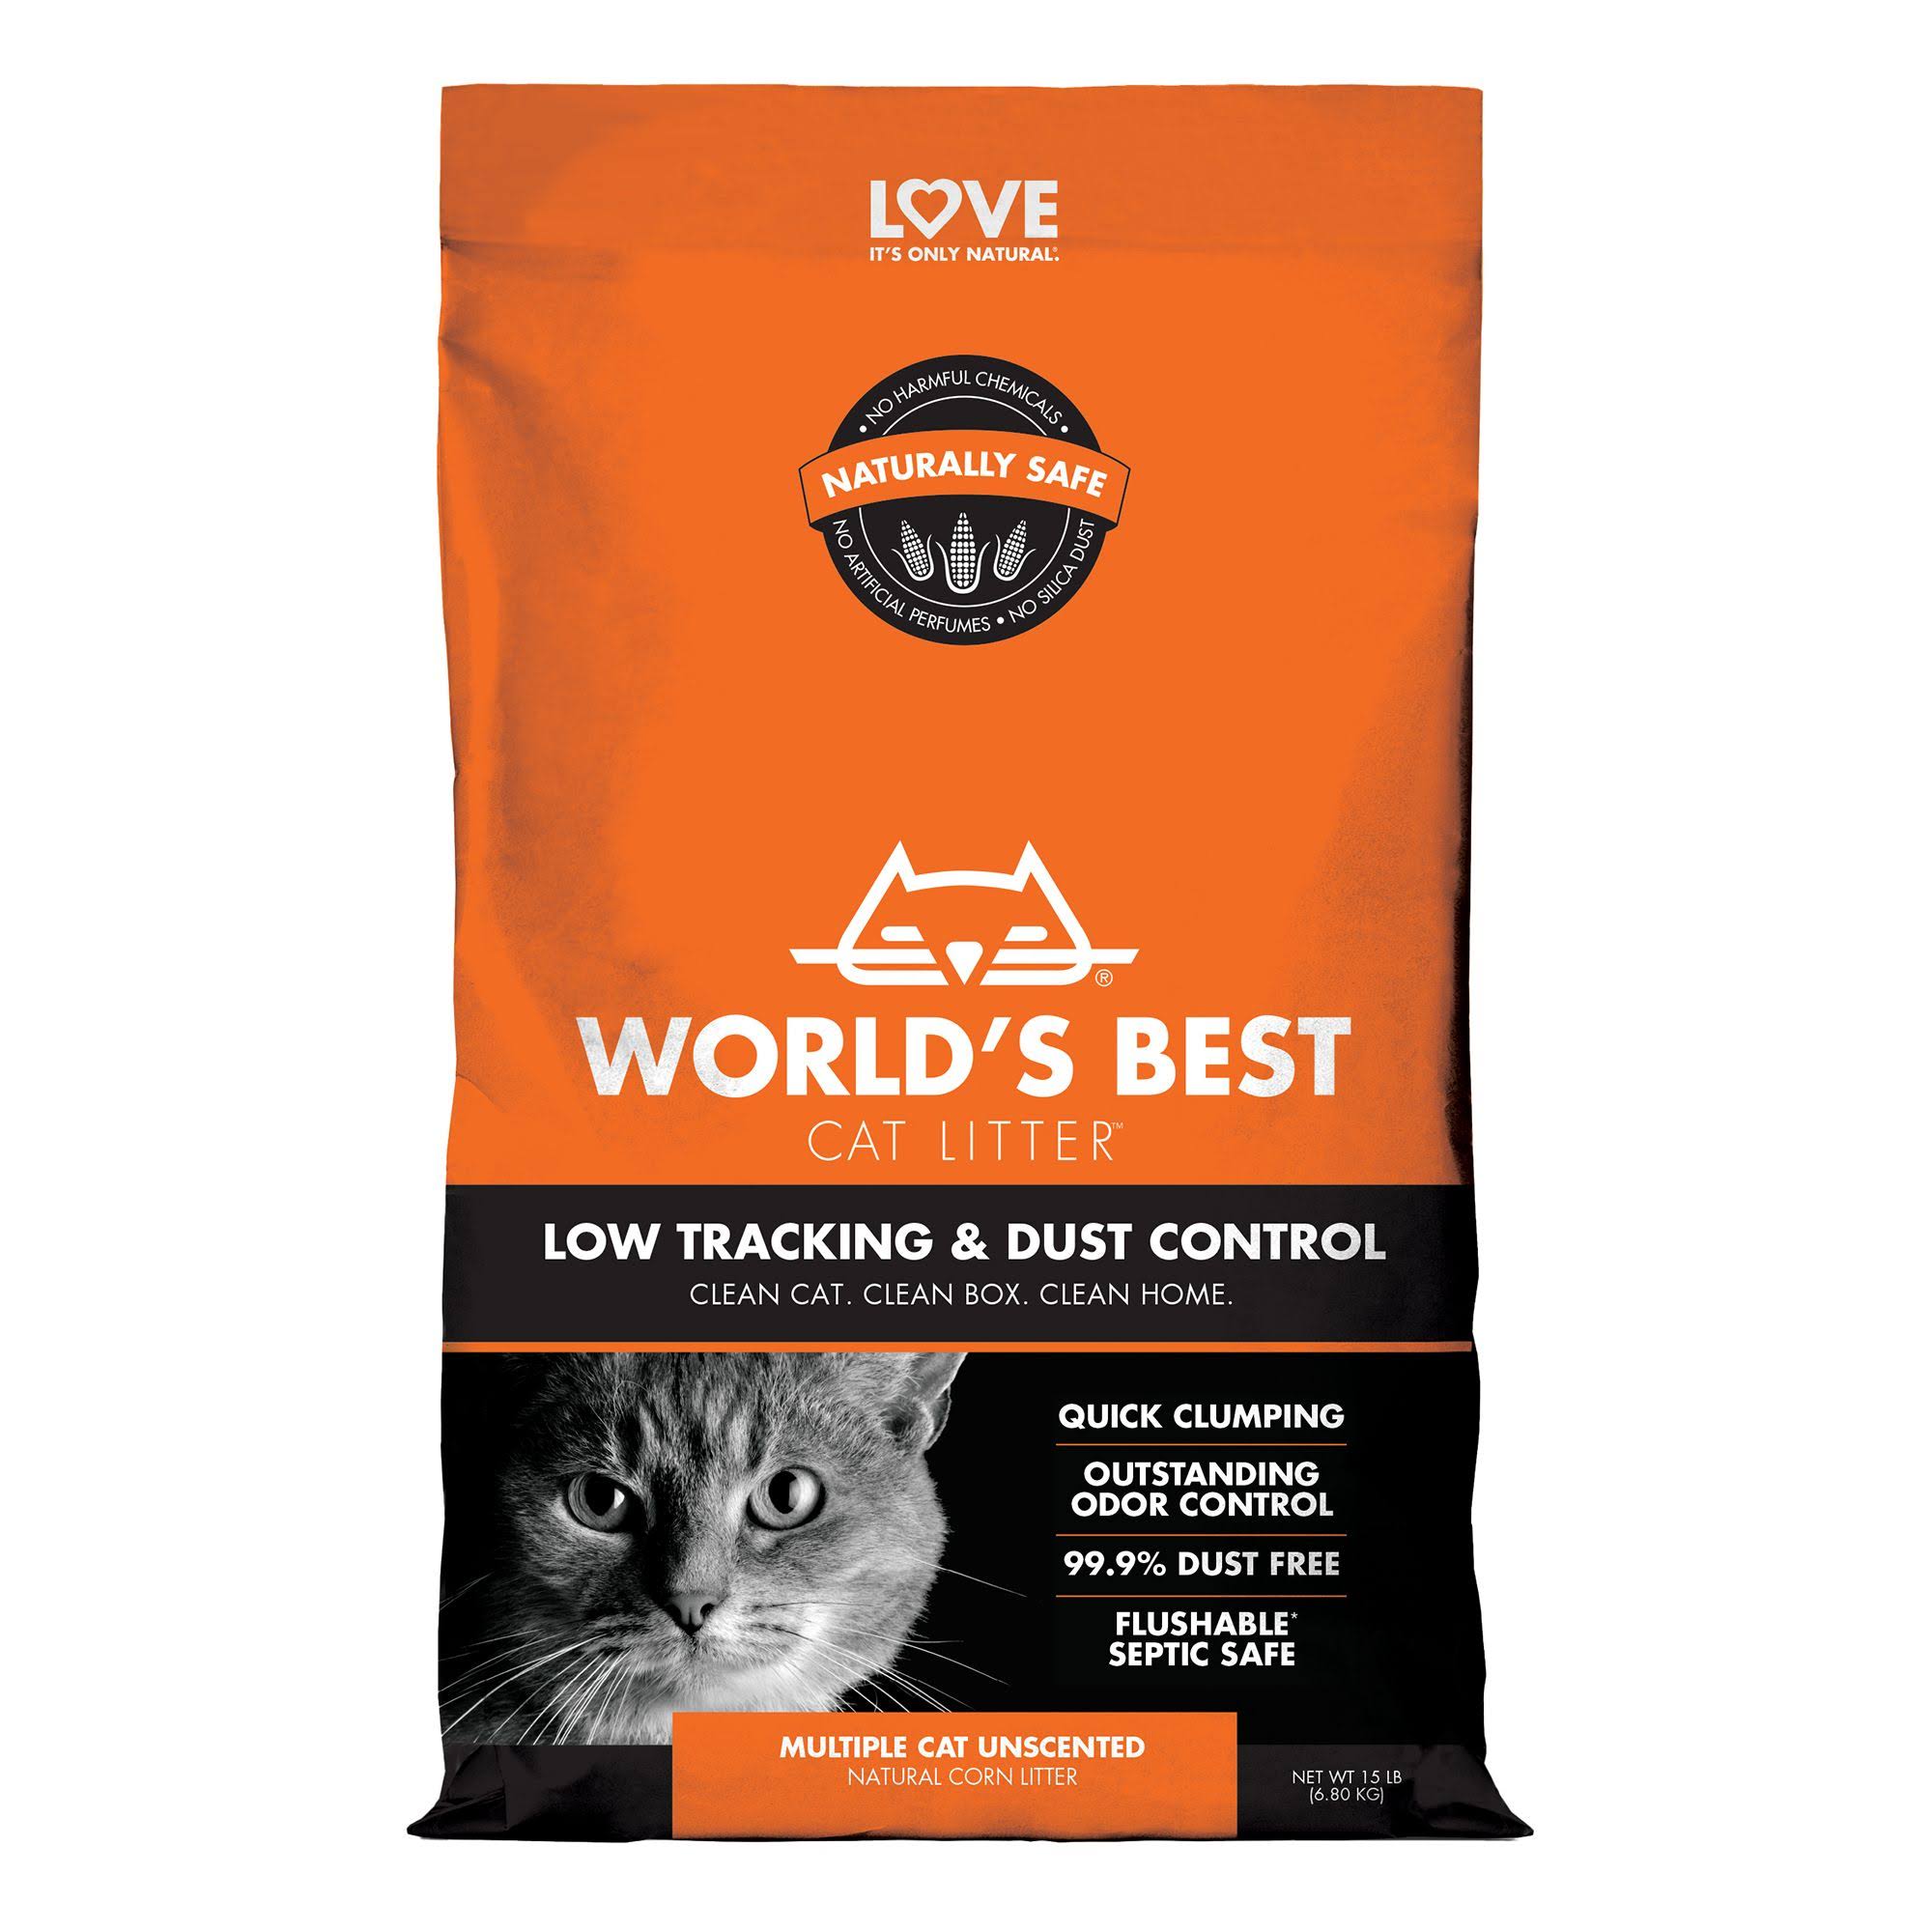 World's Best Cat Litter Low Tracking & Dust Control - 15.0 lbs